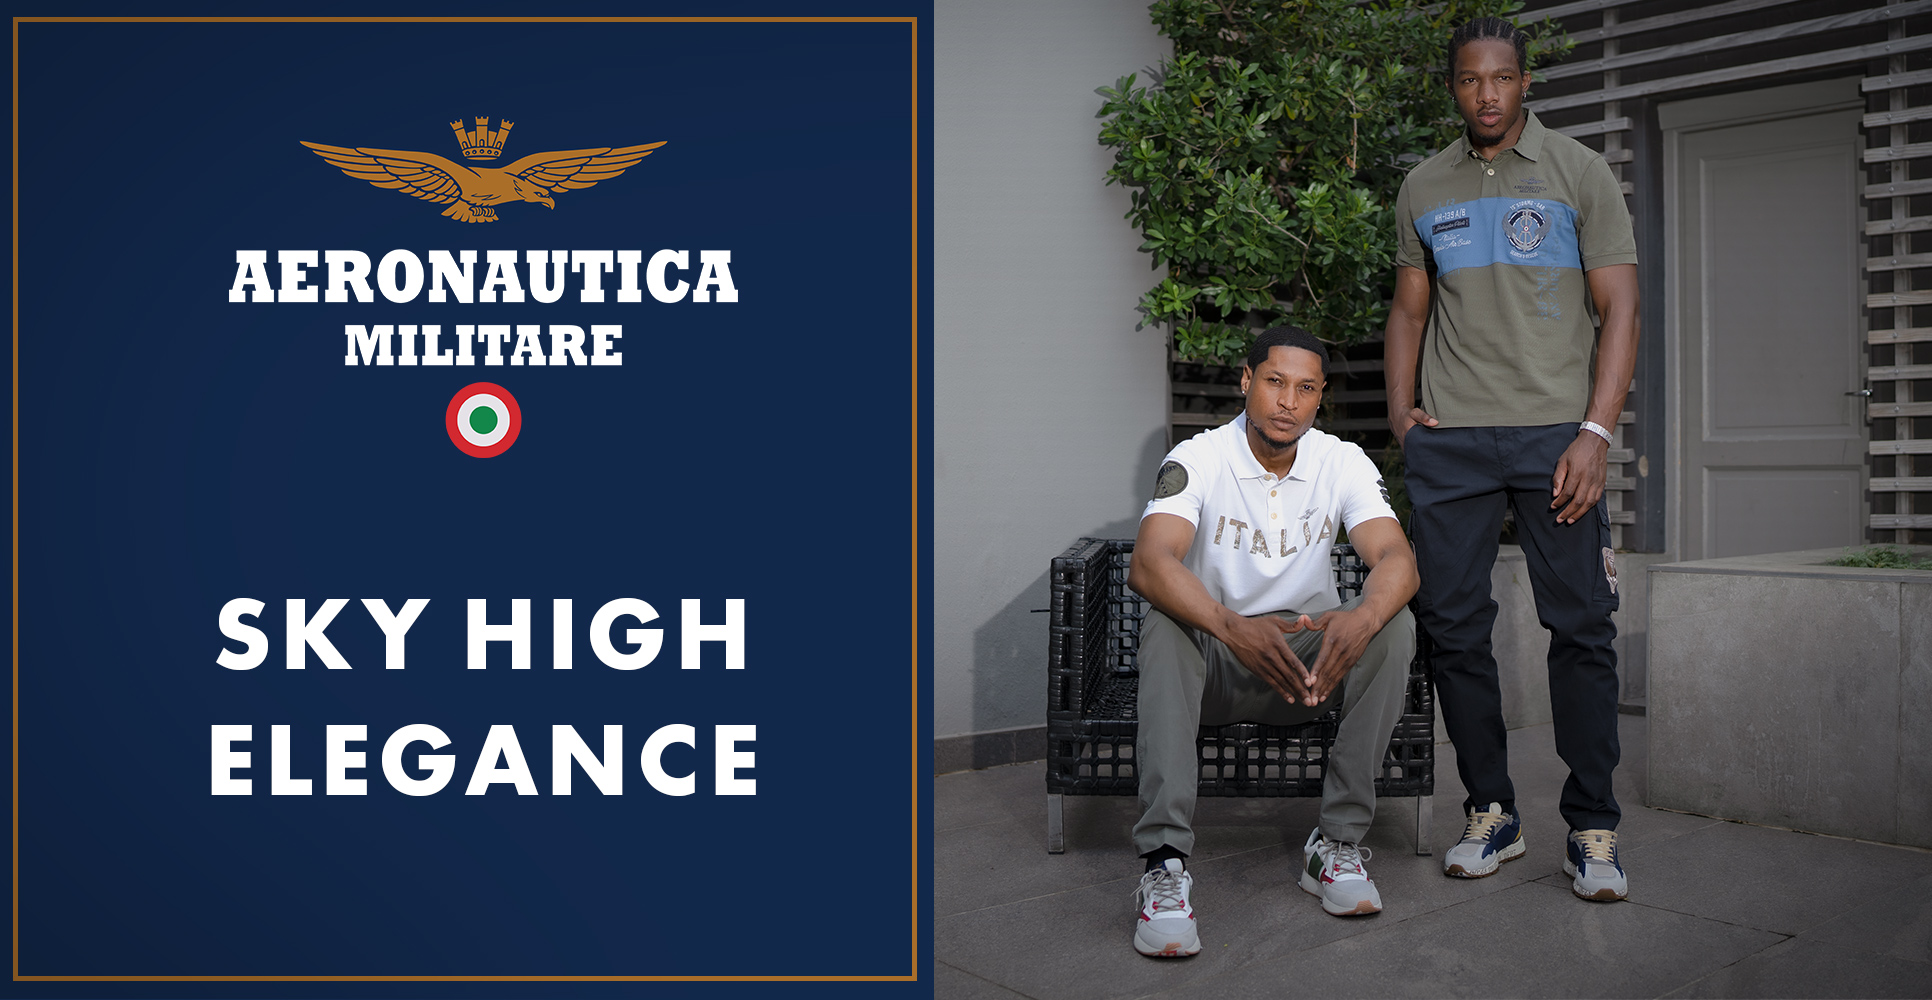 Sky High Elegance: A Pictorial Journey at Sandton San Deck with Aeronautica Militare